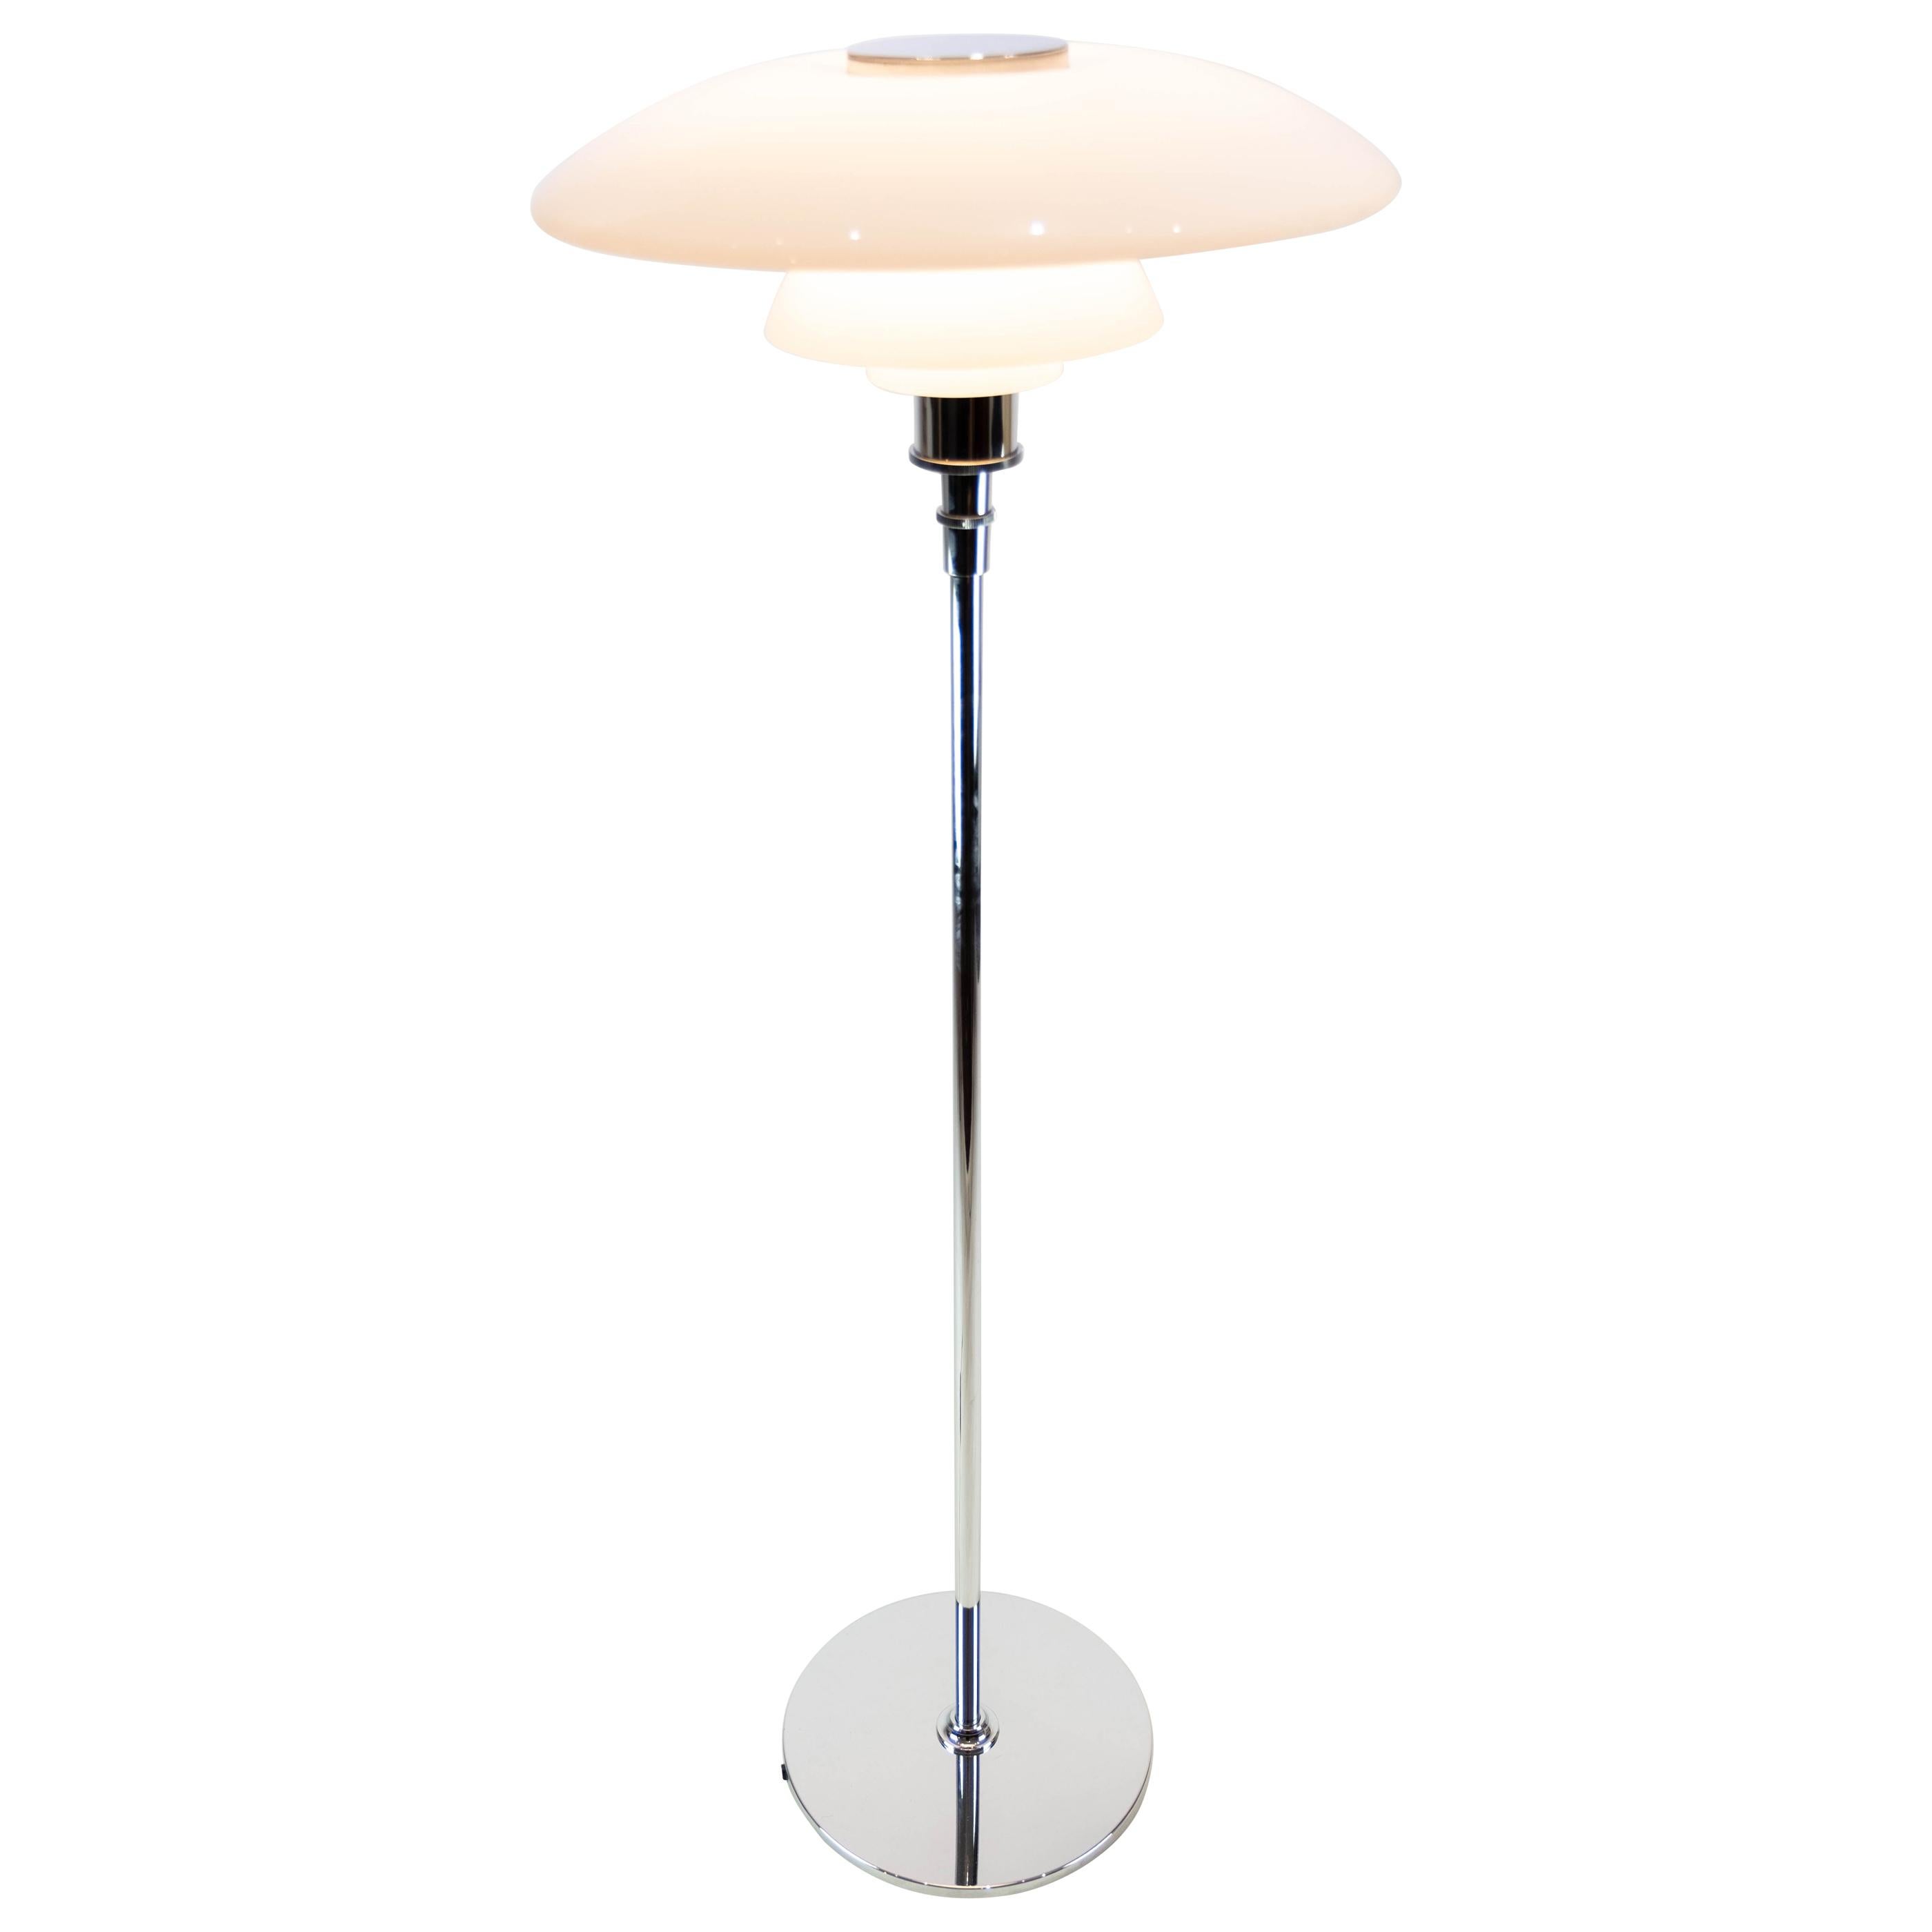 Ph 4 1/2-3 1/2 Floor Lamp of Chrome with Shades of Opaline Glass For Sale